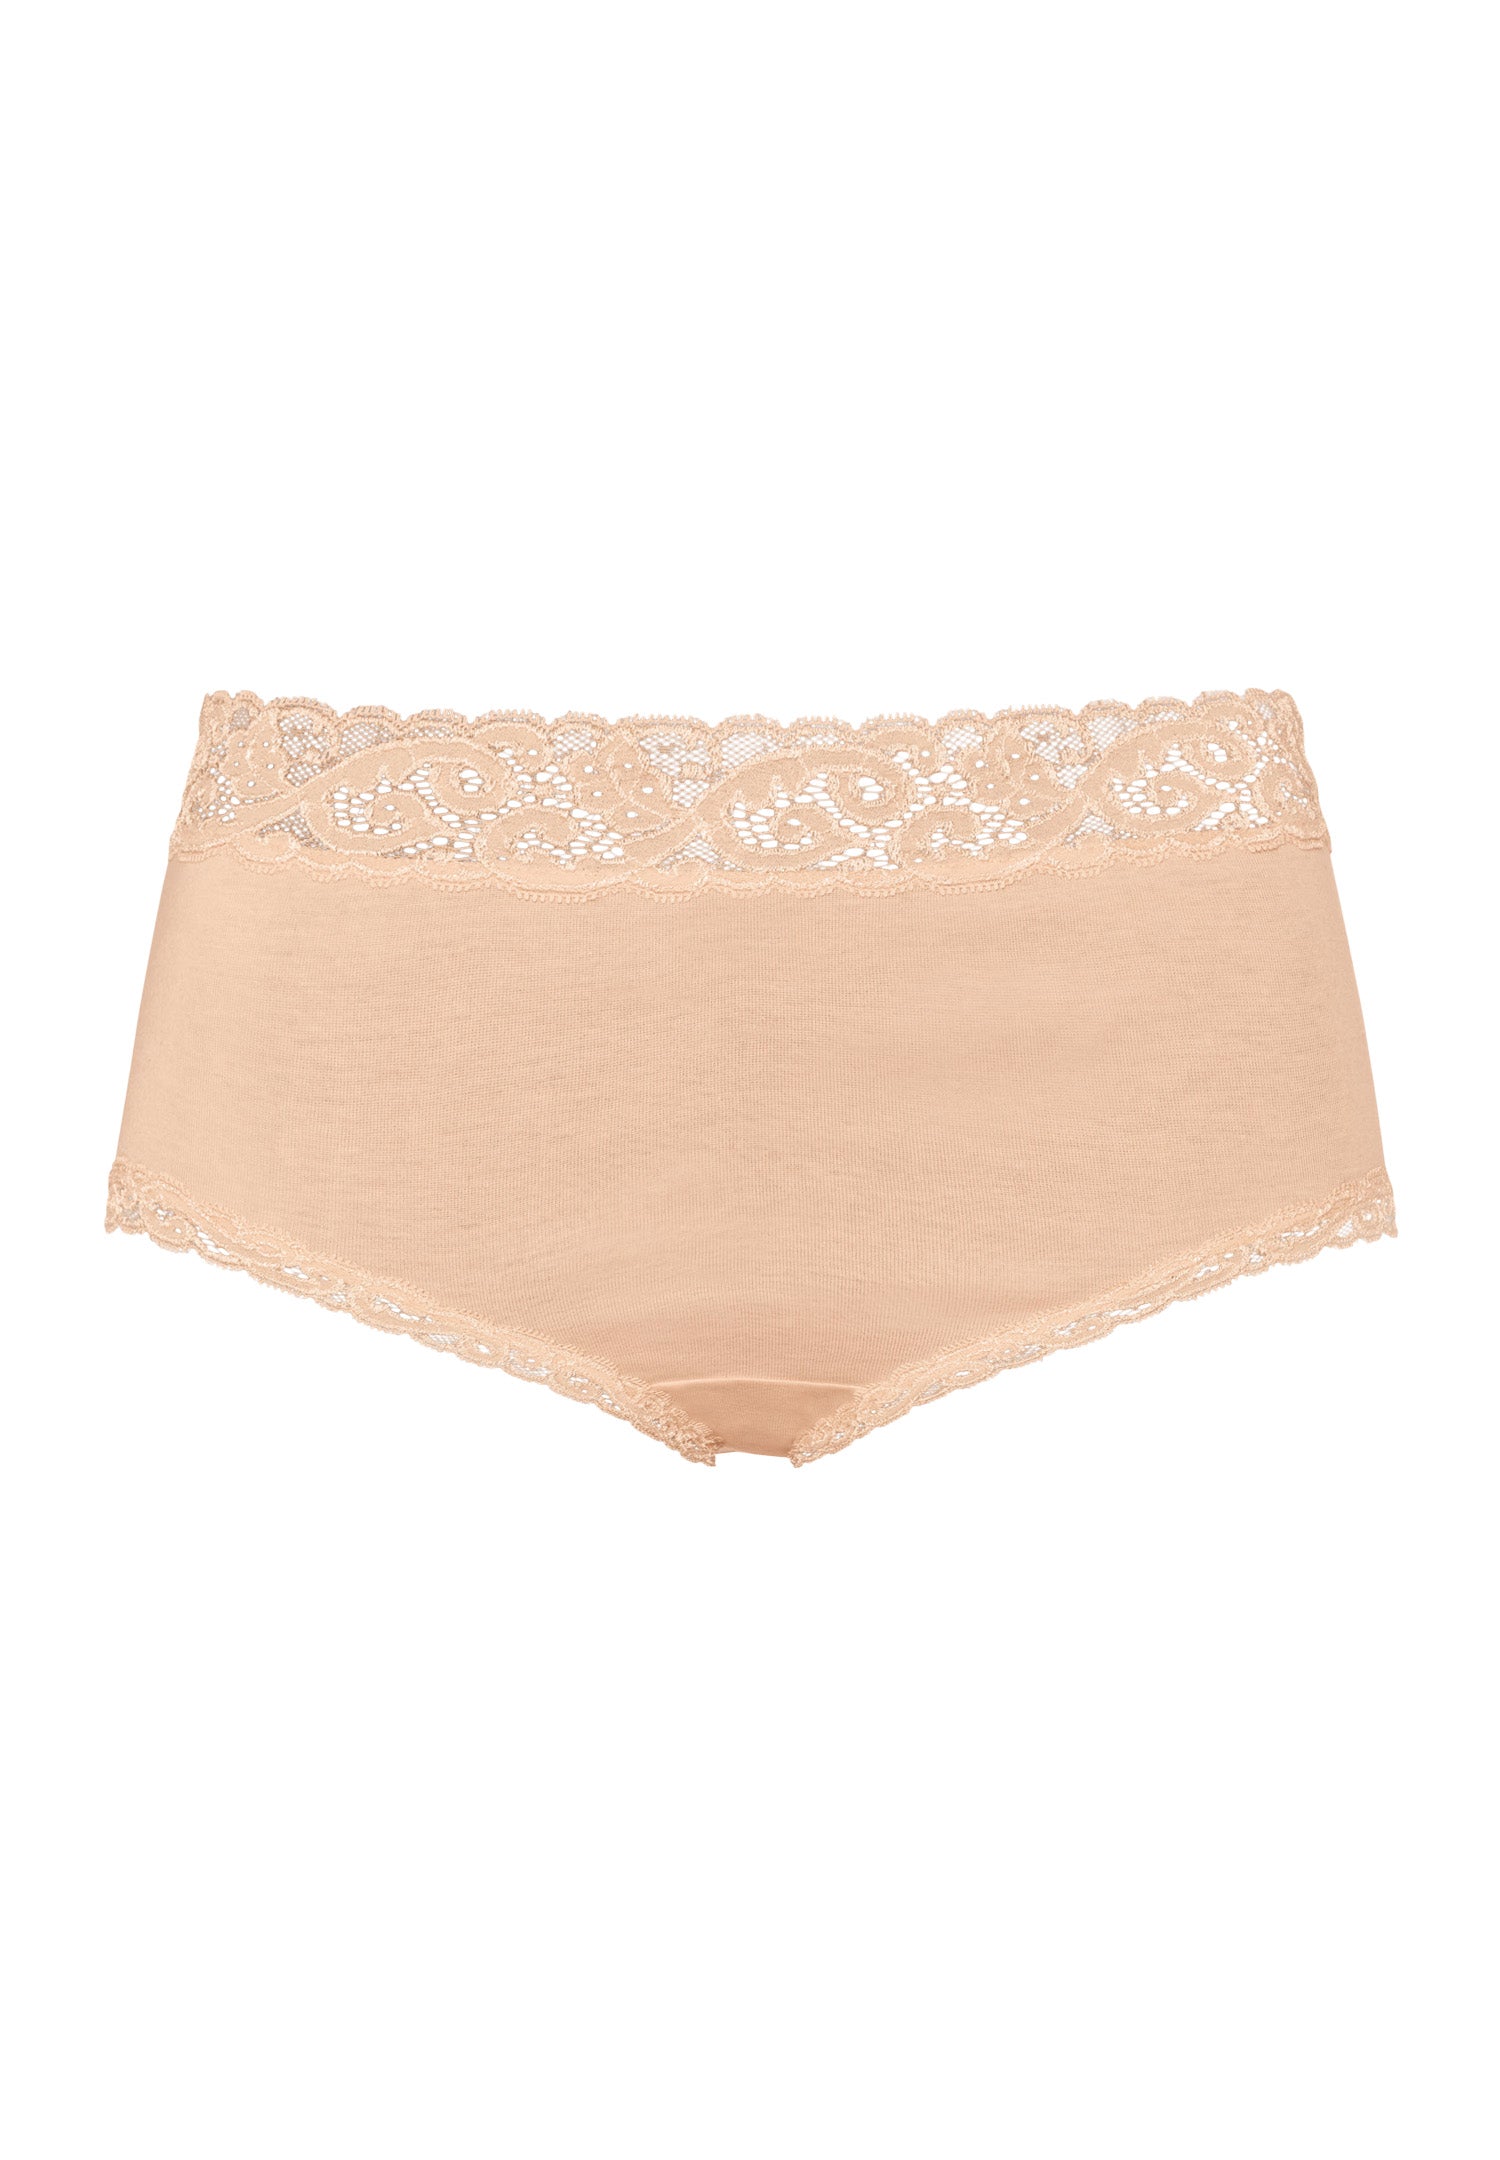 71483 Moments Full Brief - 274 Beige